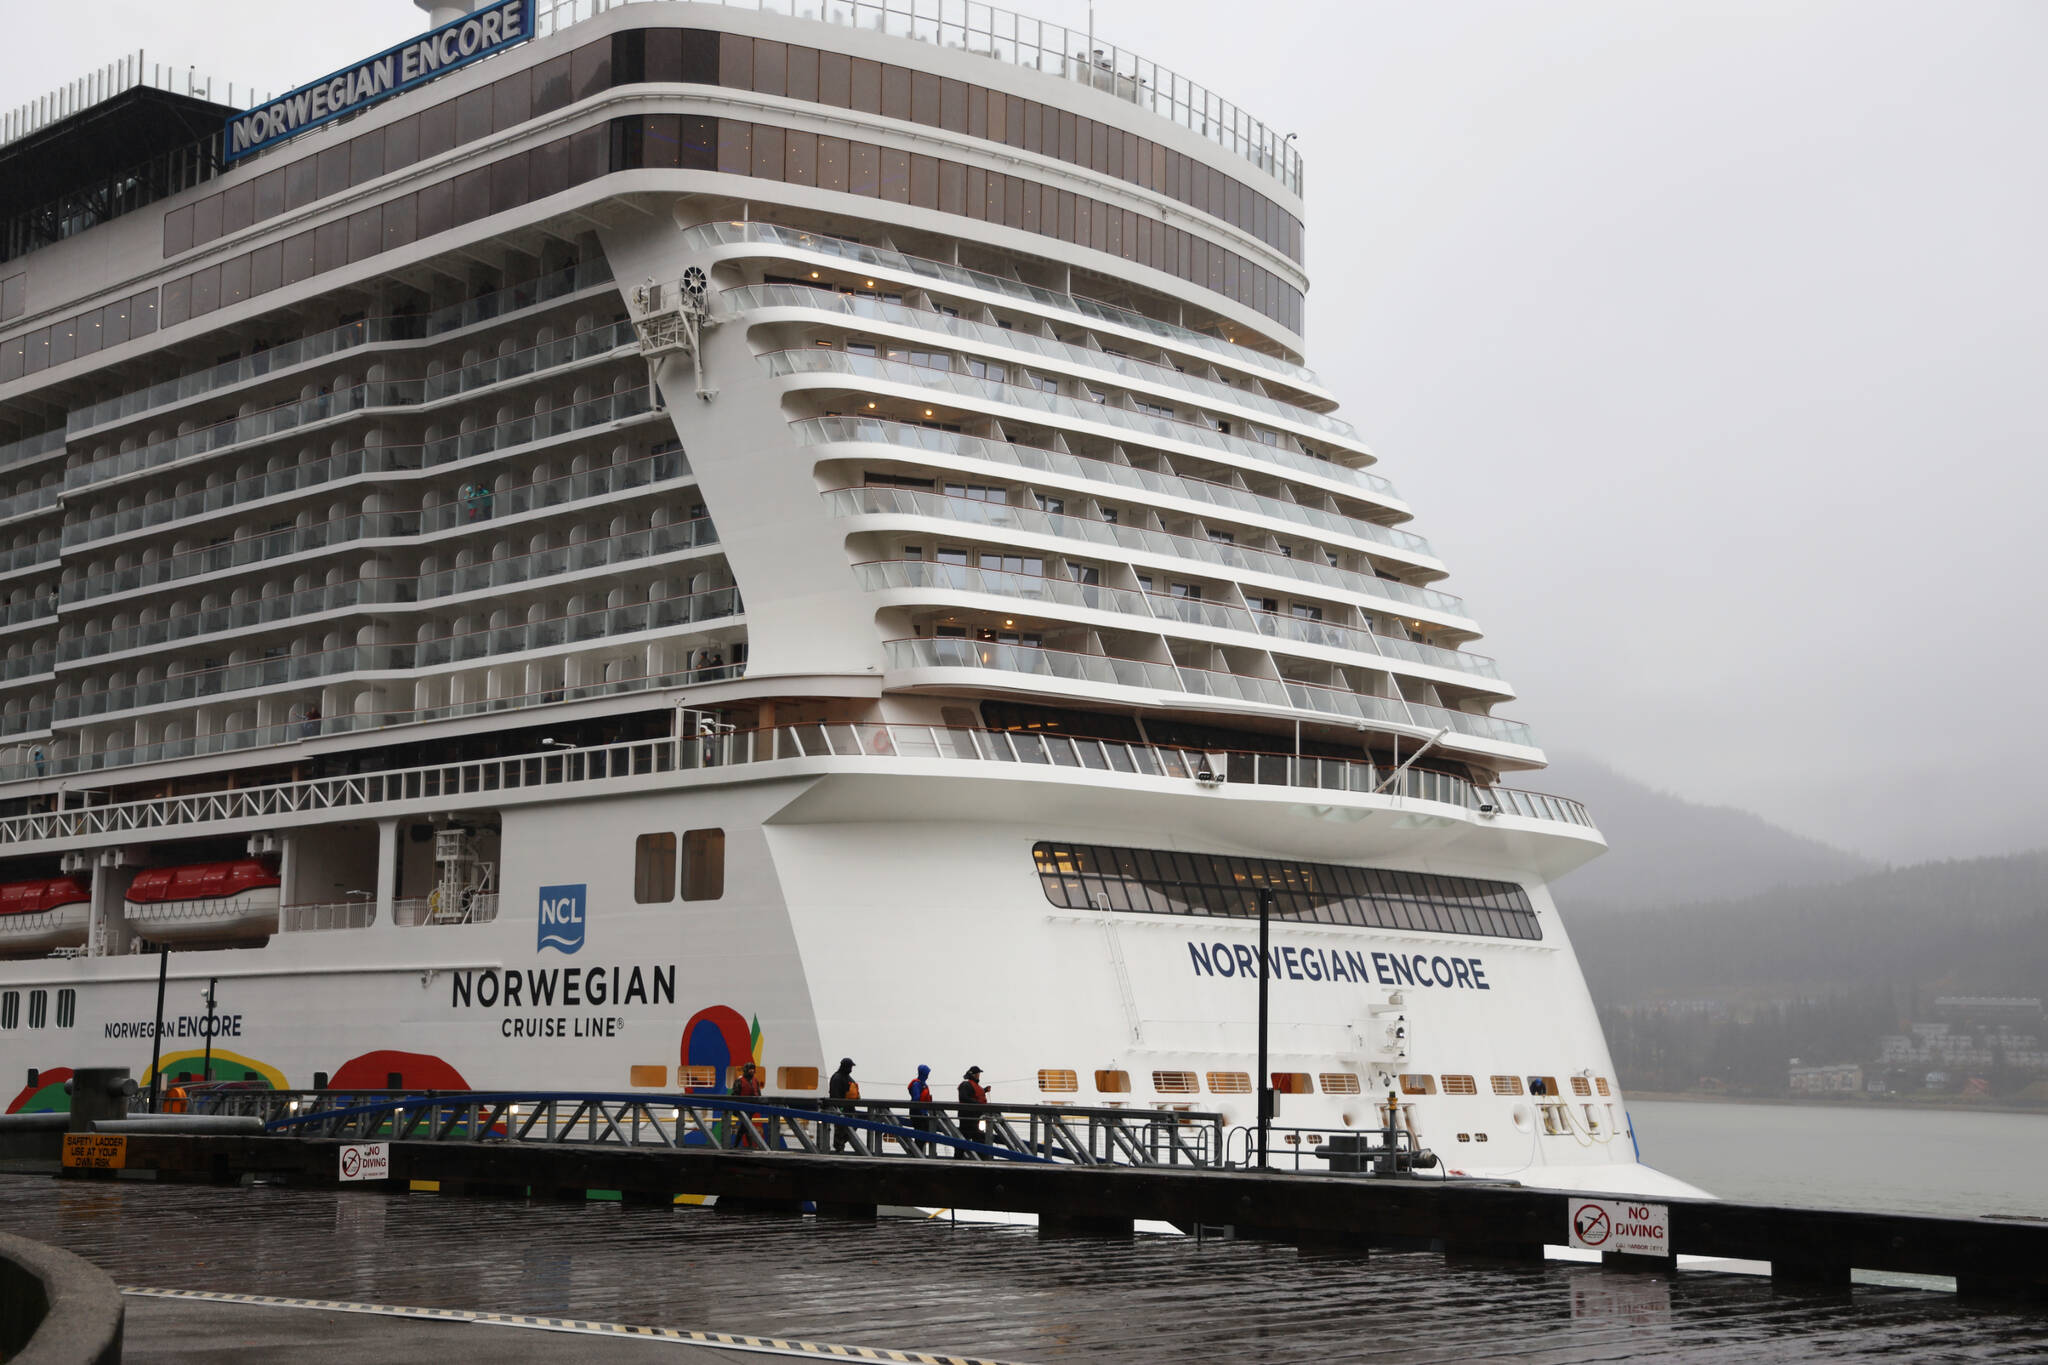 Norwegian Cruise Line’s Norwegian Encore berths at in the Juneau Harbor in late October. Findings from this year’s Juneau Tourism Survey showed nearly 75% supported limiting the number of large cruise ships per day in Juneau’s harbor to five. (Clarise Larson / Juneau Empire)